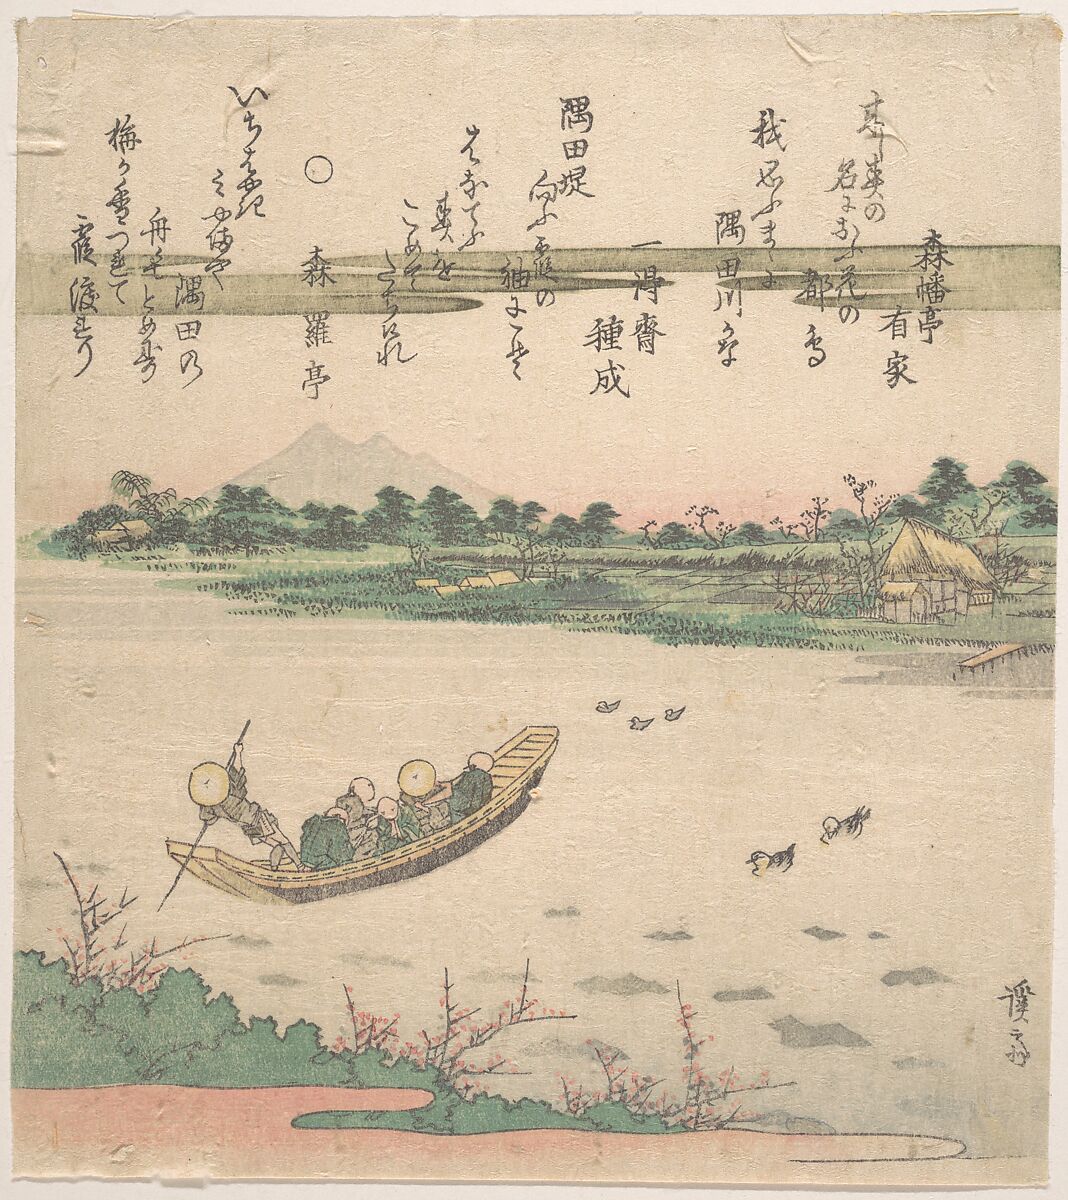 Boat Ferrying Across River, Keisai Eisen (Japanese, 1790–1848), Woodblock print (surimono); ink and color on paper, Japan 